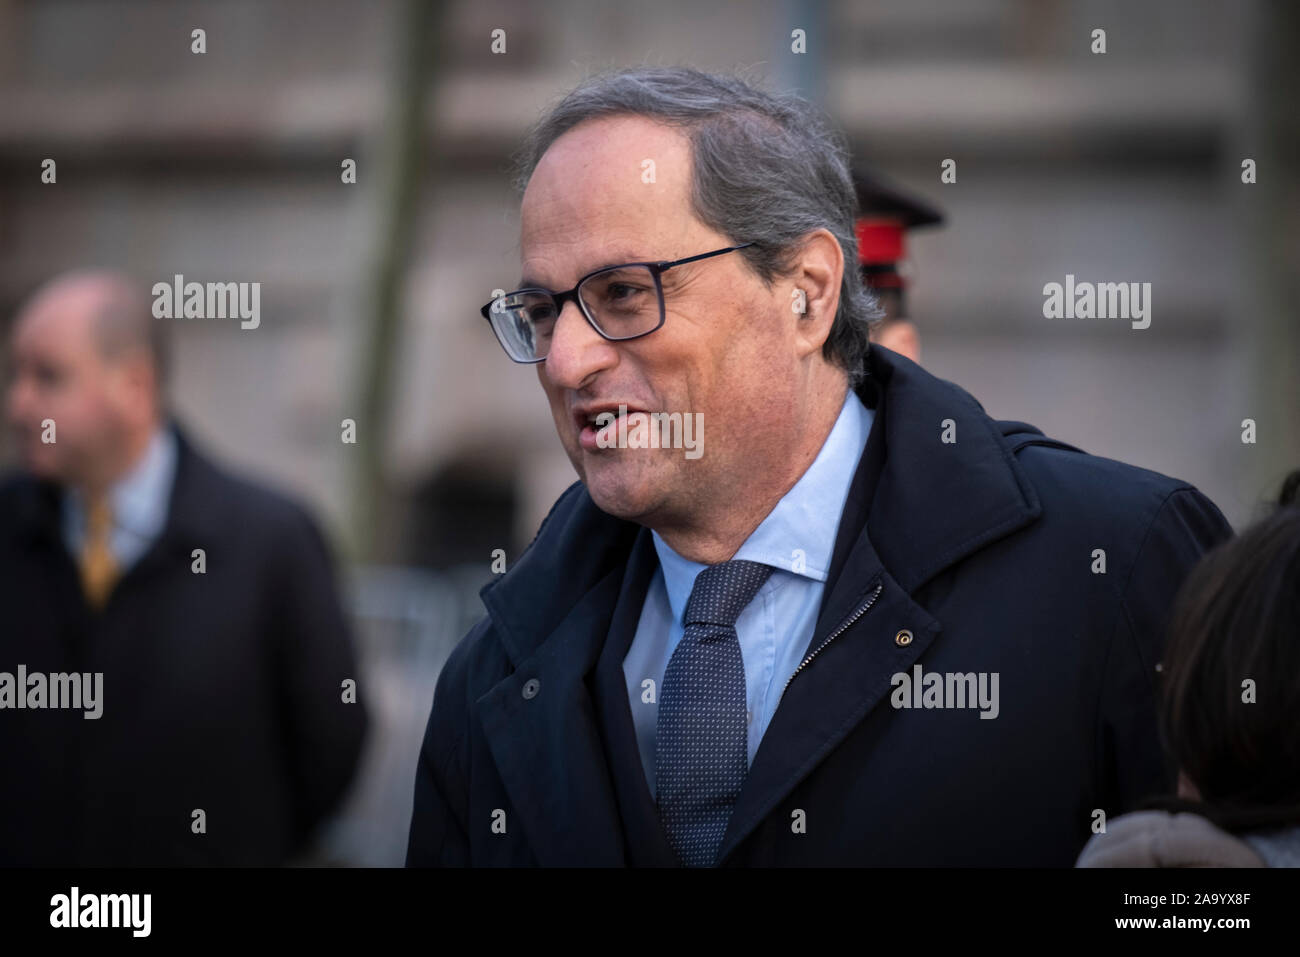 The president of the Generalidad de Catalunya Quim Torra arrives to testify before the Superior Court of Justice of Catalonia.The president of the Generalitat of Catalonia Quim Torra has testified today before the Superior Court of Justice of Catalonia accused of disobeying the order to withdraw symbols for the independence of Catalonia from public buildings during the 28A election campaign. Stock Photo